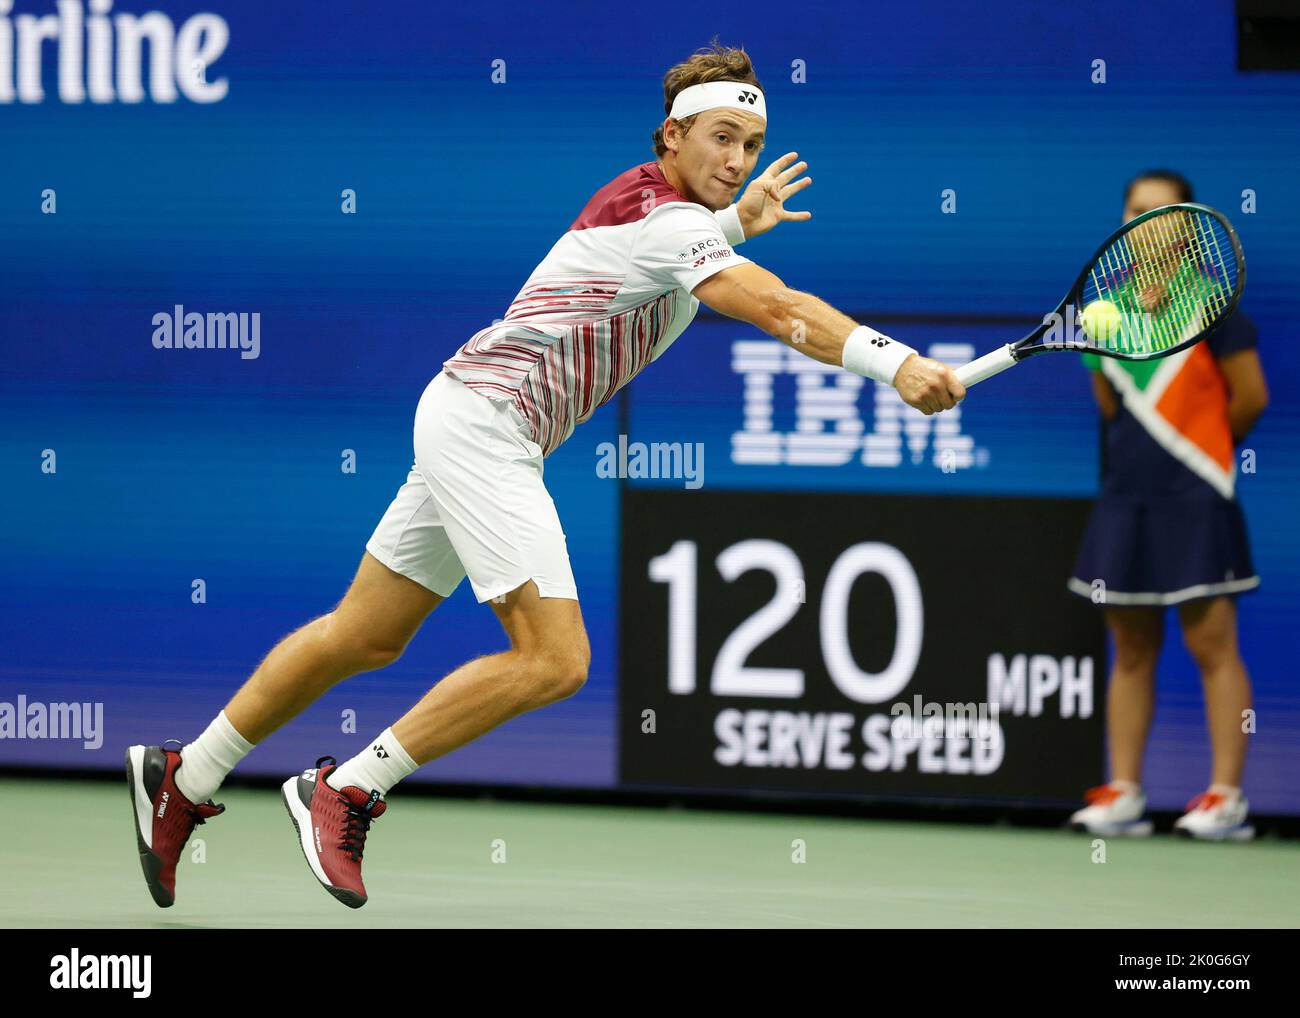 New York, USA, 11th. September 2022. Norwegian tennis player Casper Ruud  in action during the MenÕs Final of the  US  Open  Championships, Billie Jean King National Tennis Center on Sunday 11 September 2022. © Juergen Hasenkopf / Alamy Live News Stock Photo